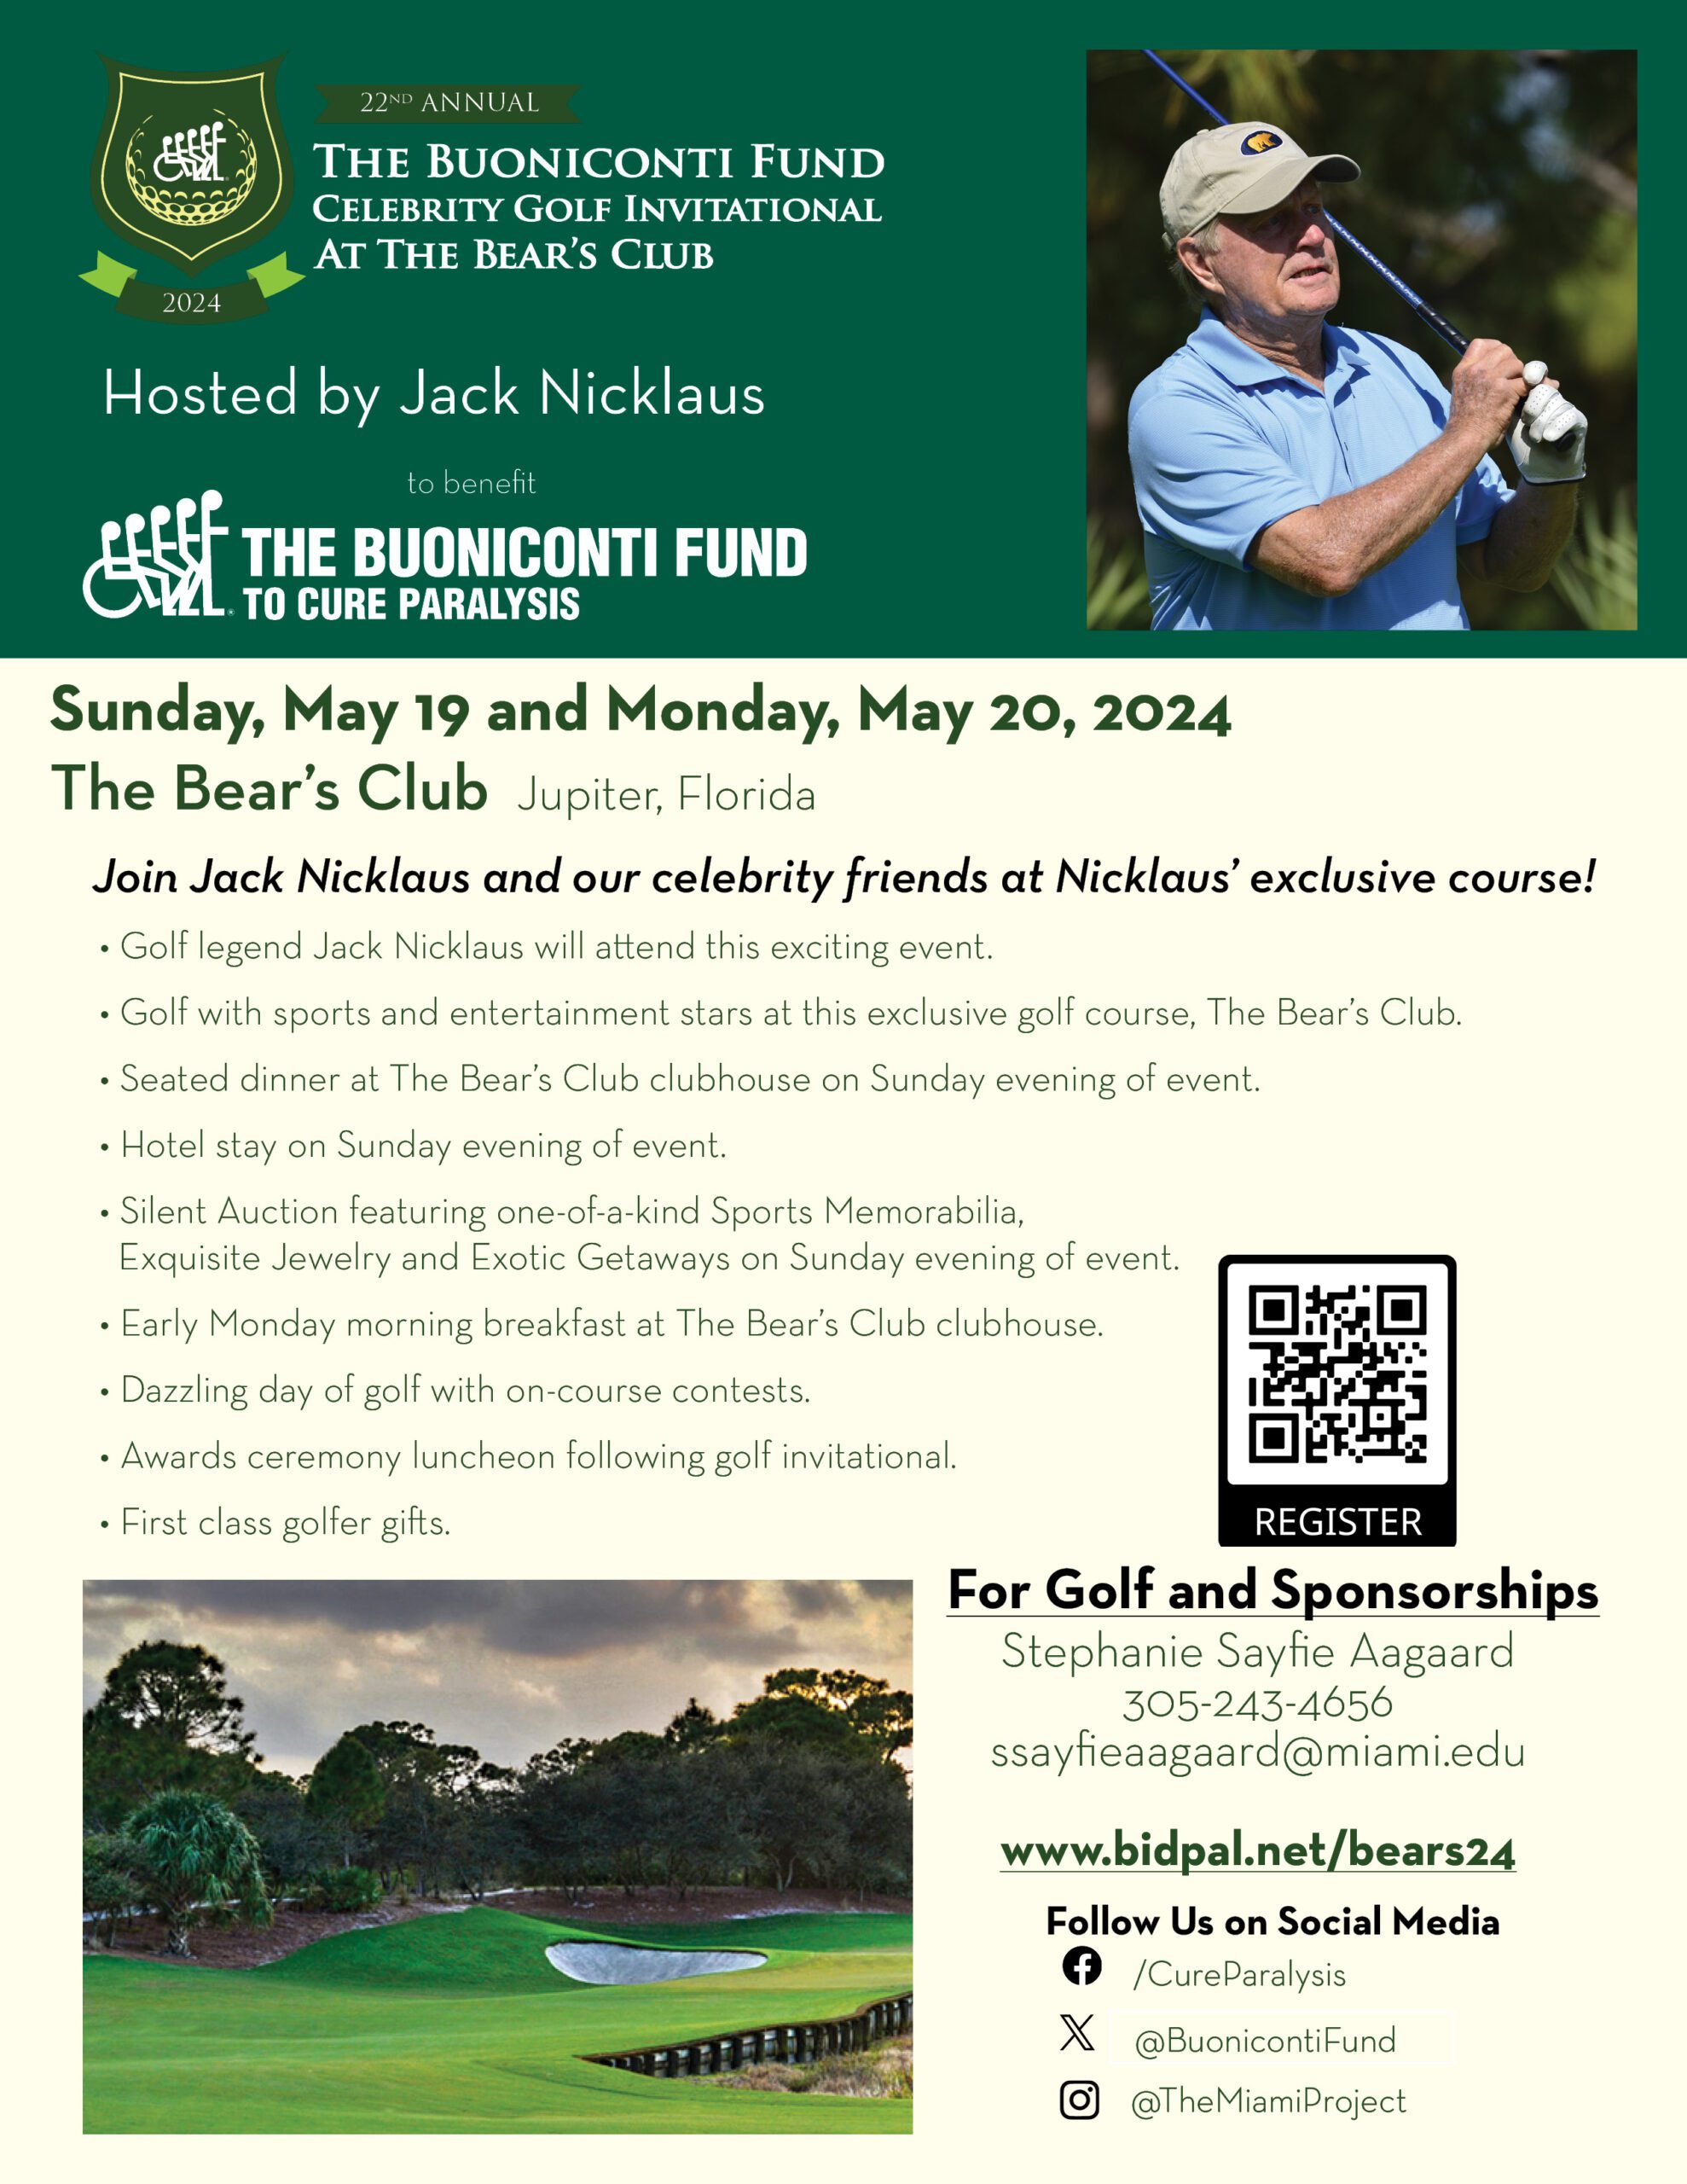 22nd Annual Celebrity Golf Invitational at The Bear's Club